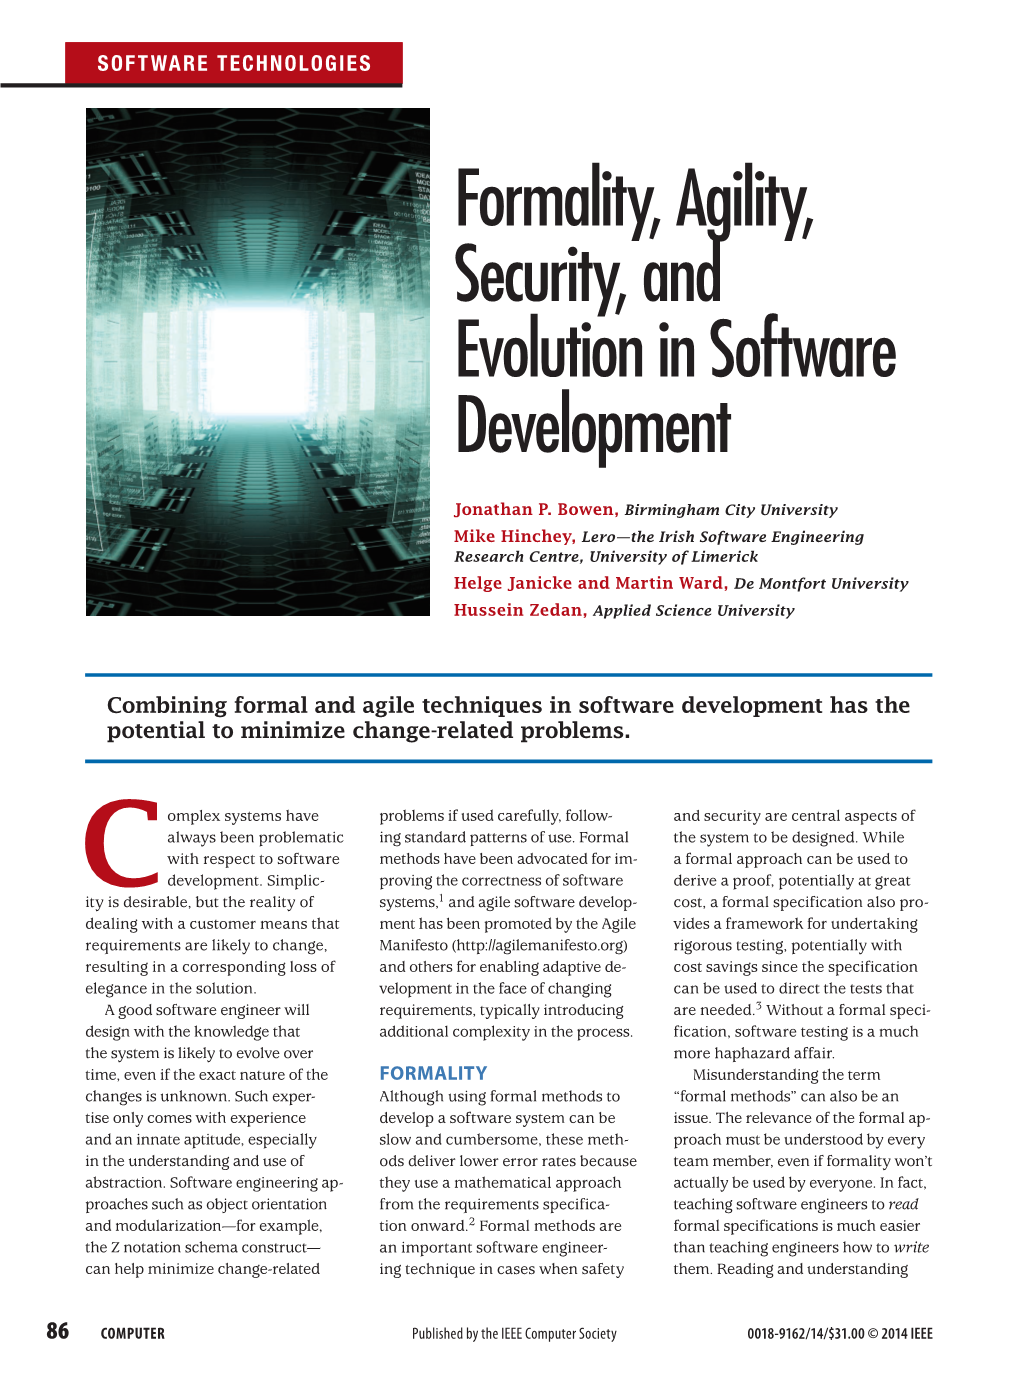 Formality, Agility, Security, and Evolution in Software Development